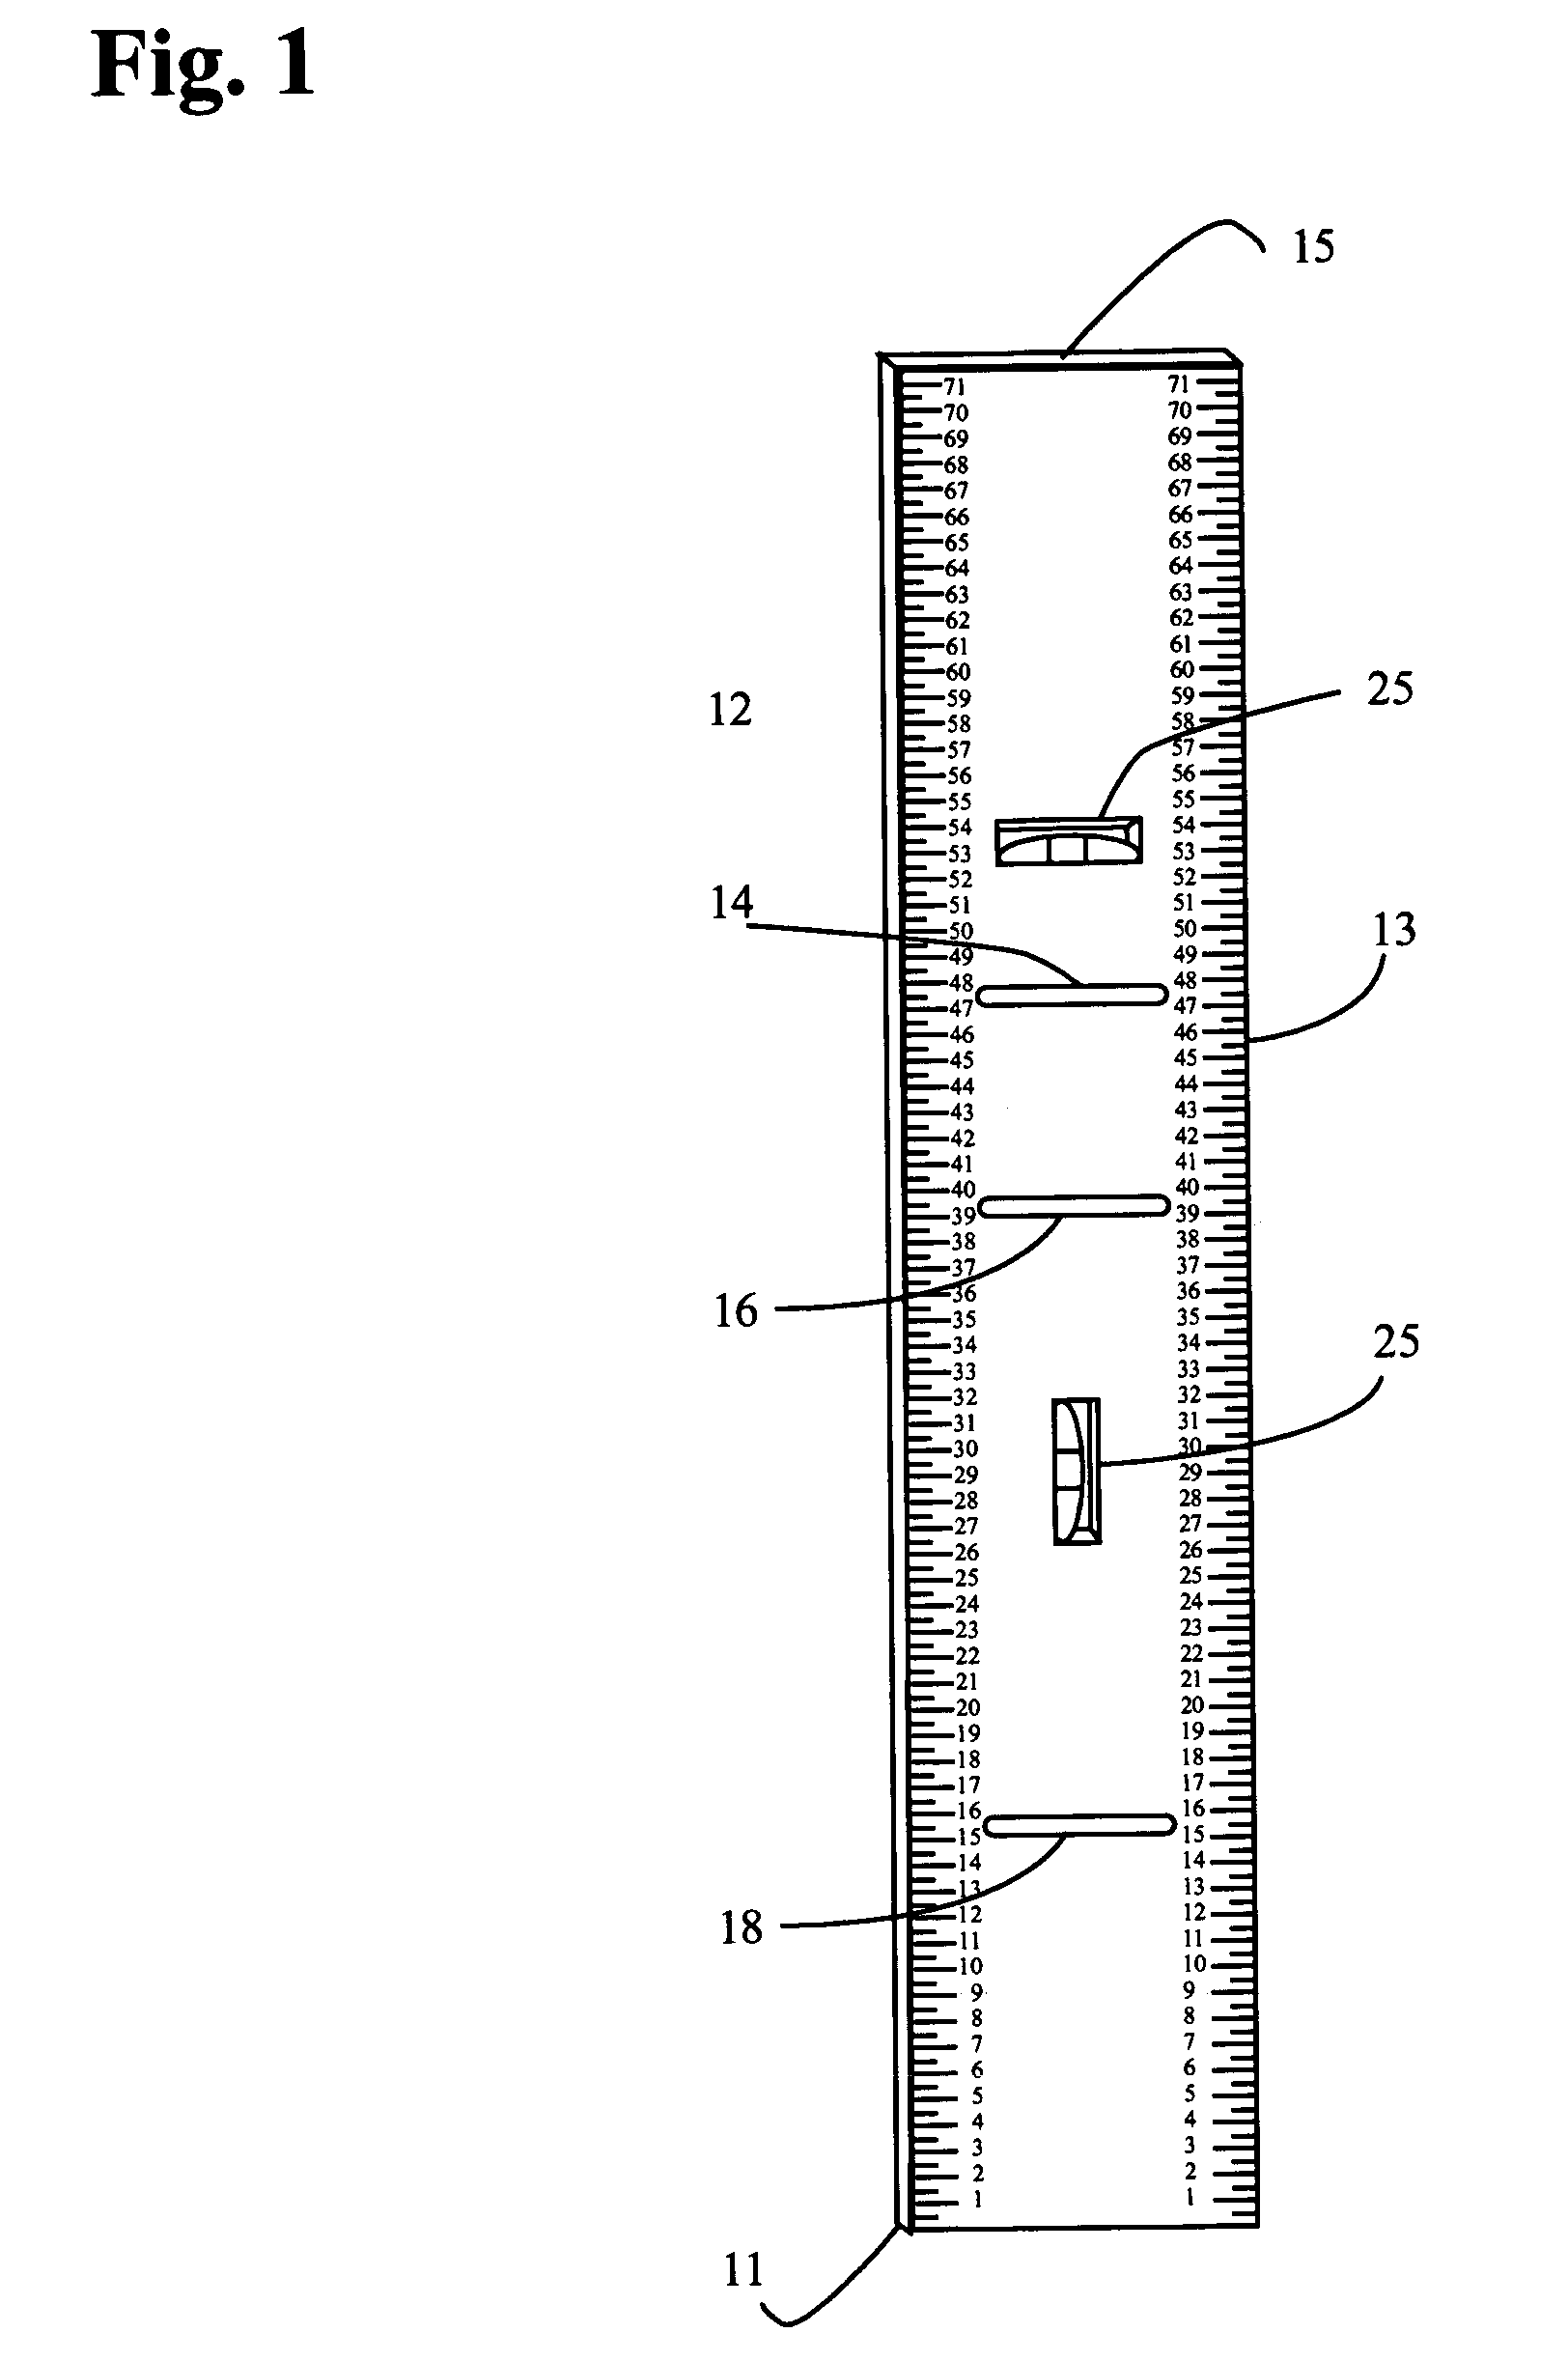 Electrician's measurement apparatus and method of use